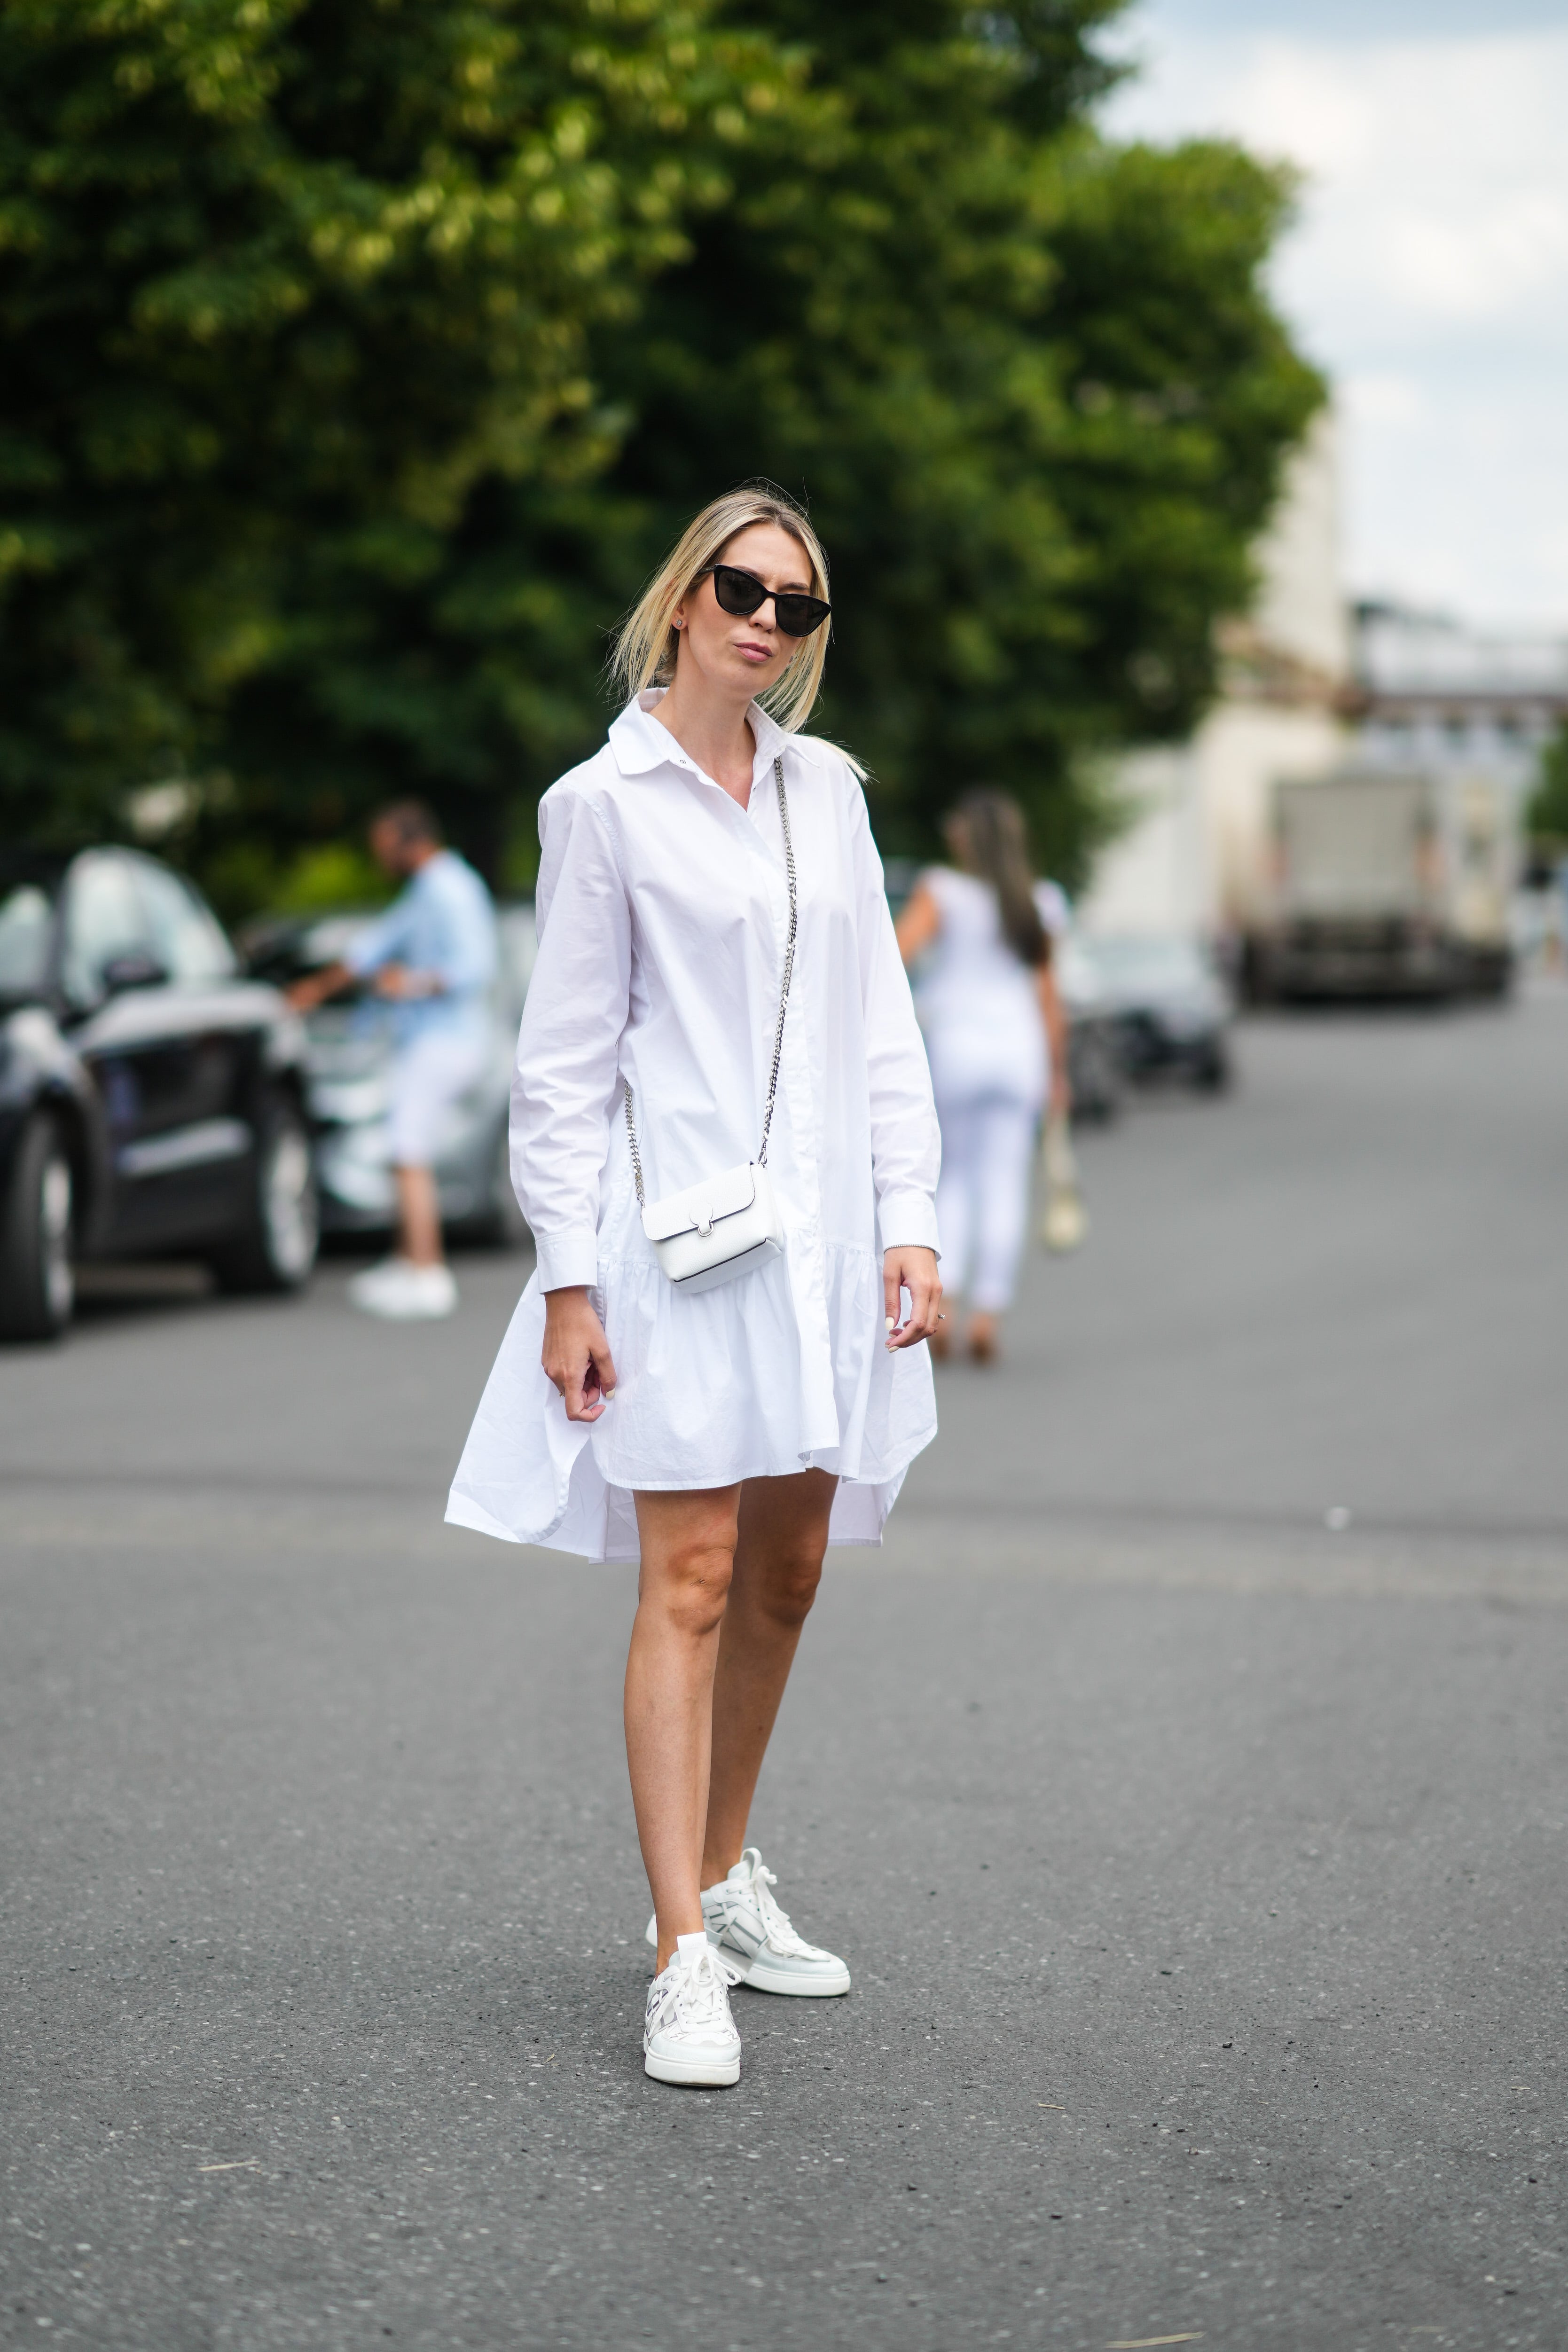 How to Wear a Dress With Sneakers